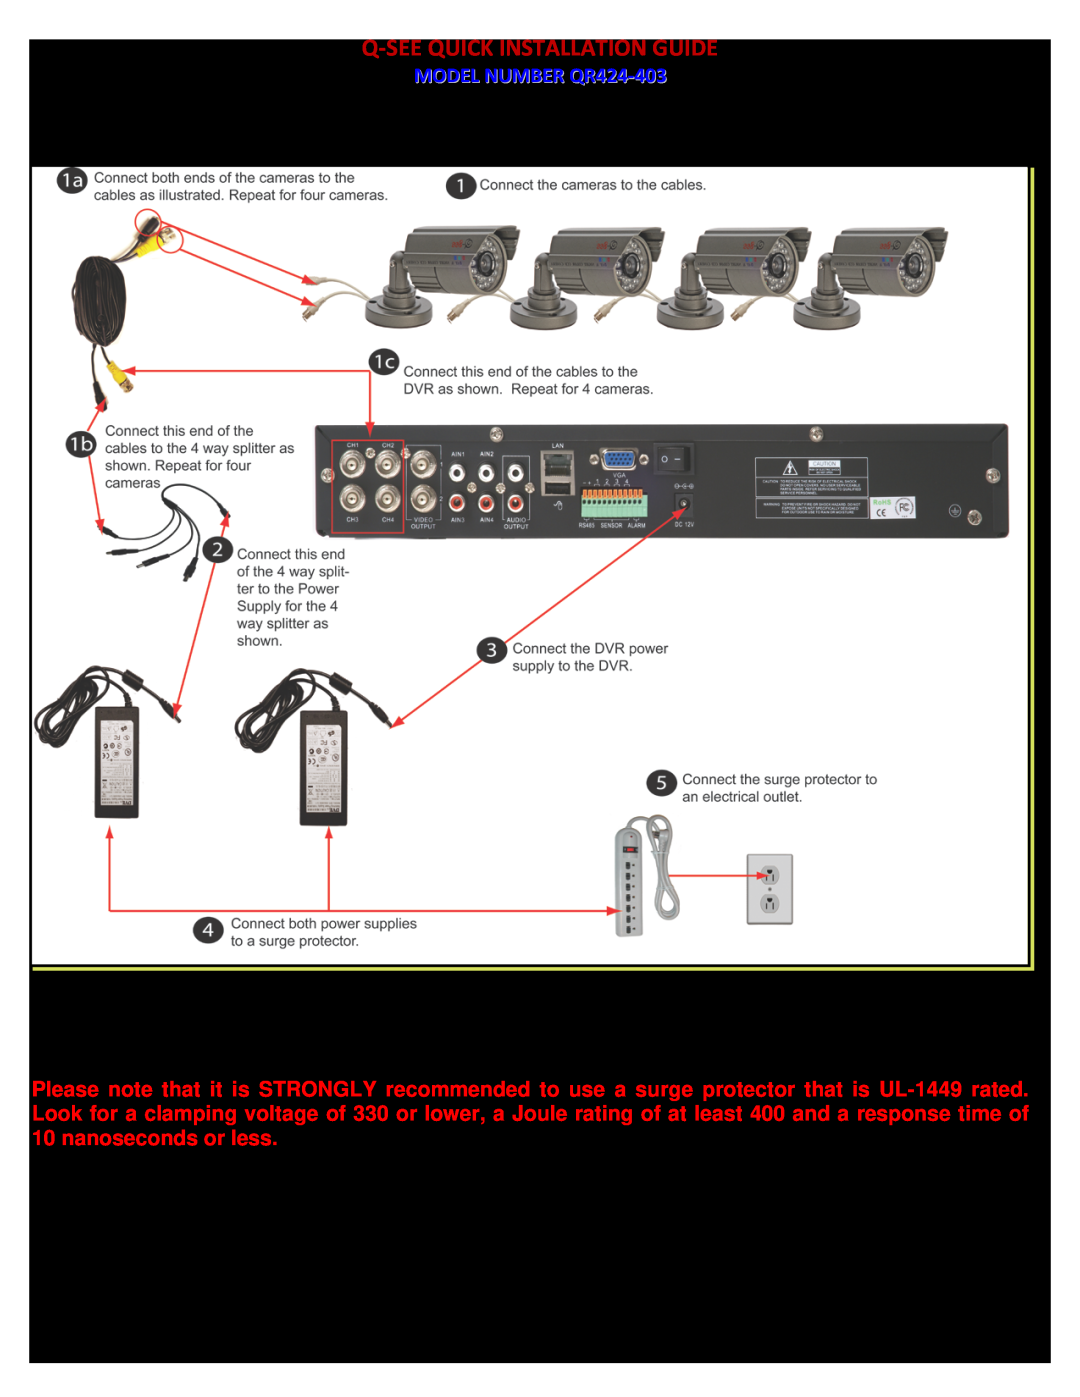 Q-See manual PART 2 - DVR CAMERA AND POWER CONNECTIONS, P a g e, Q-Seequick Installation Guide, MODEL NUMBER QR424-403 